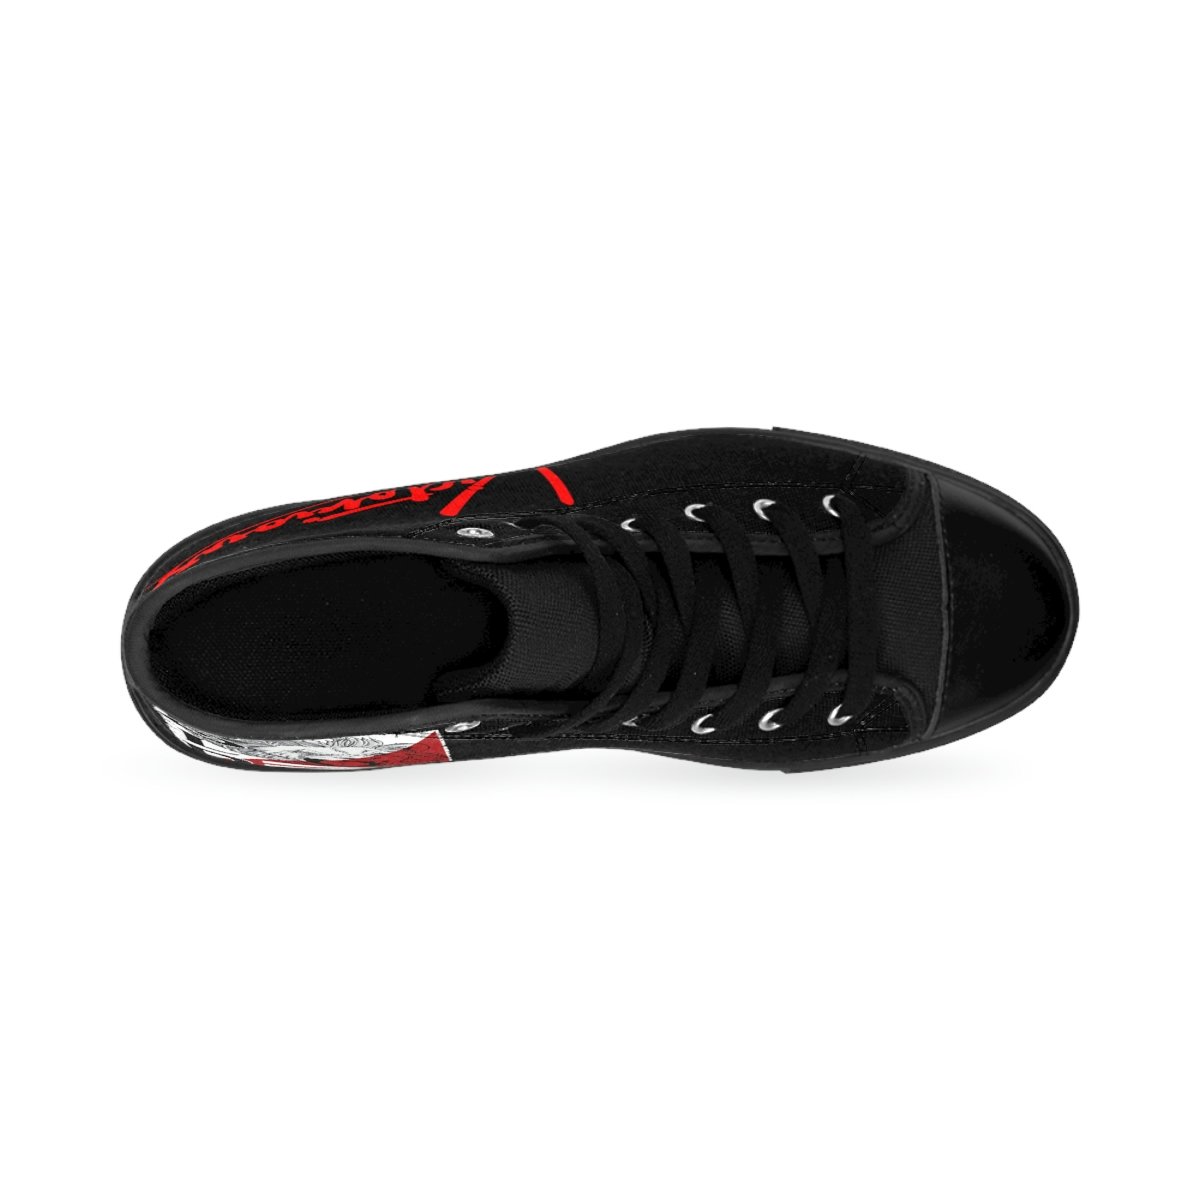 Victorious – Bold Men’s High-top Sneakers